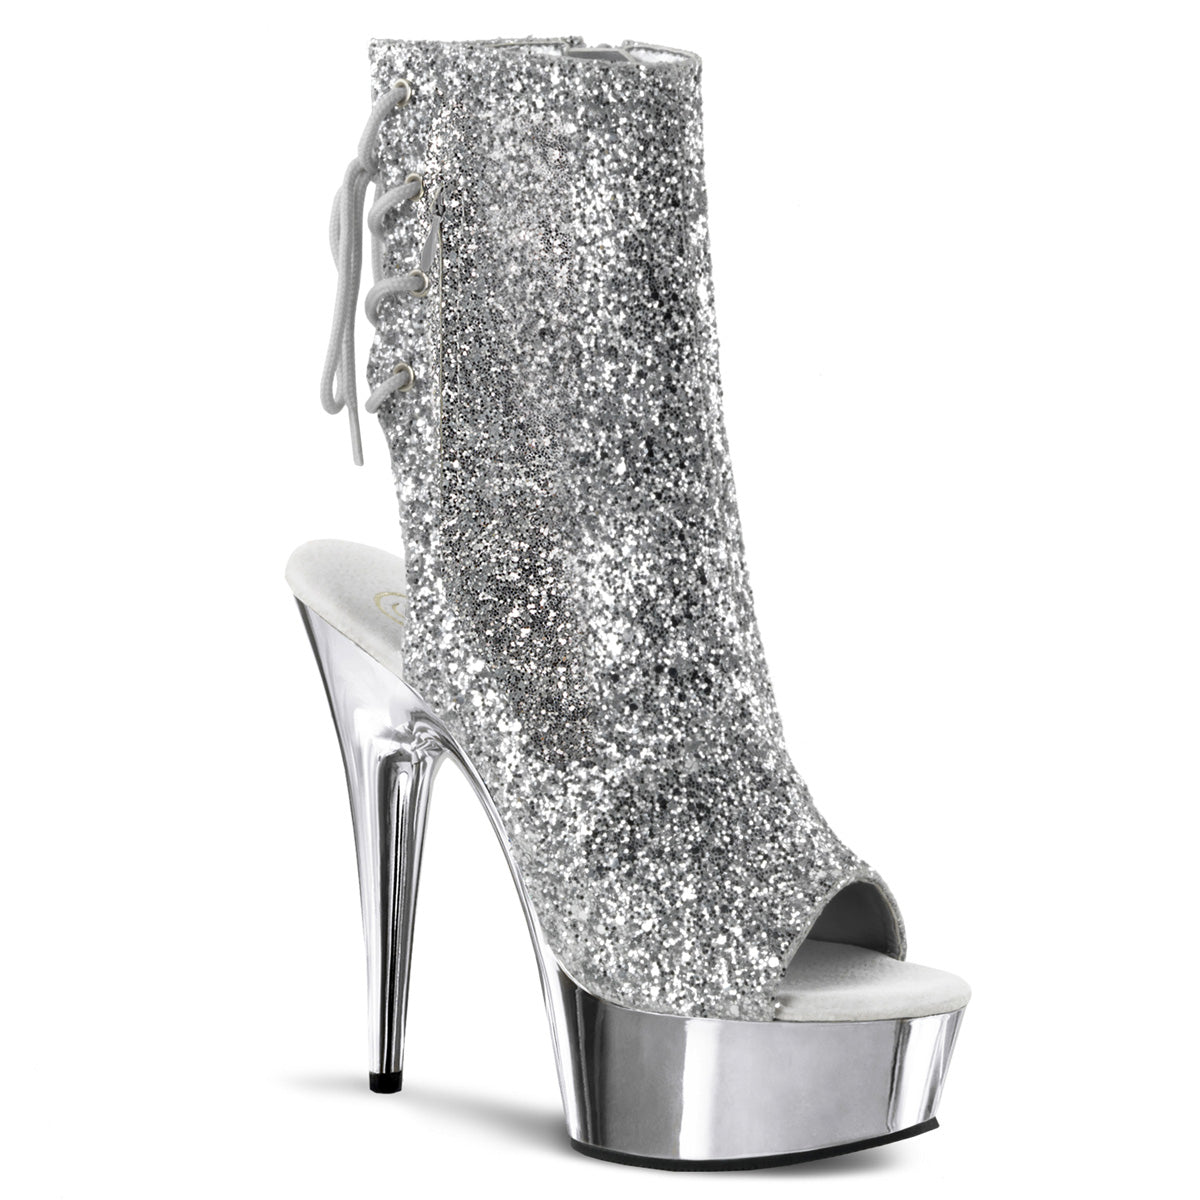 DELIGHT-1018G Silver Glitter/Silver Chrome Ankle Boot